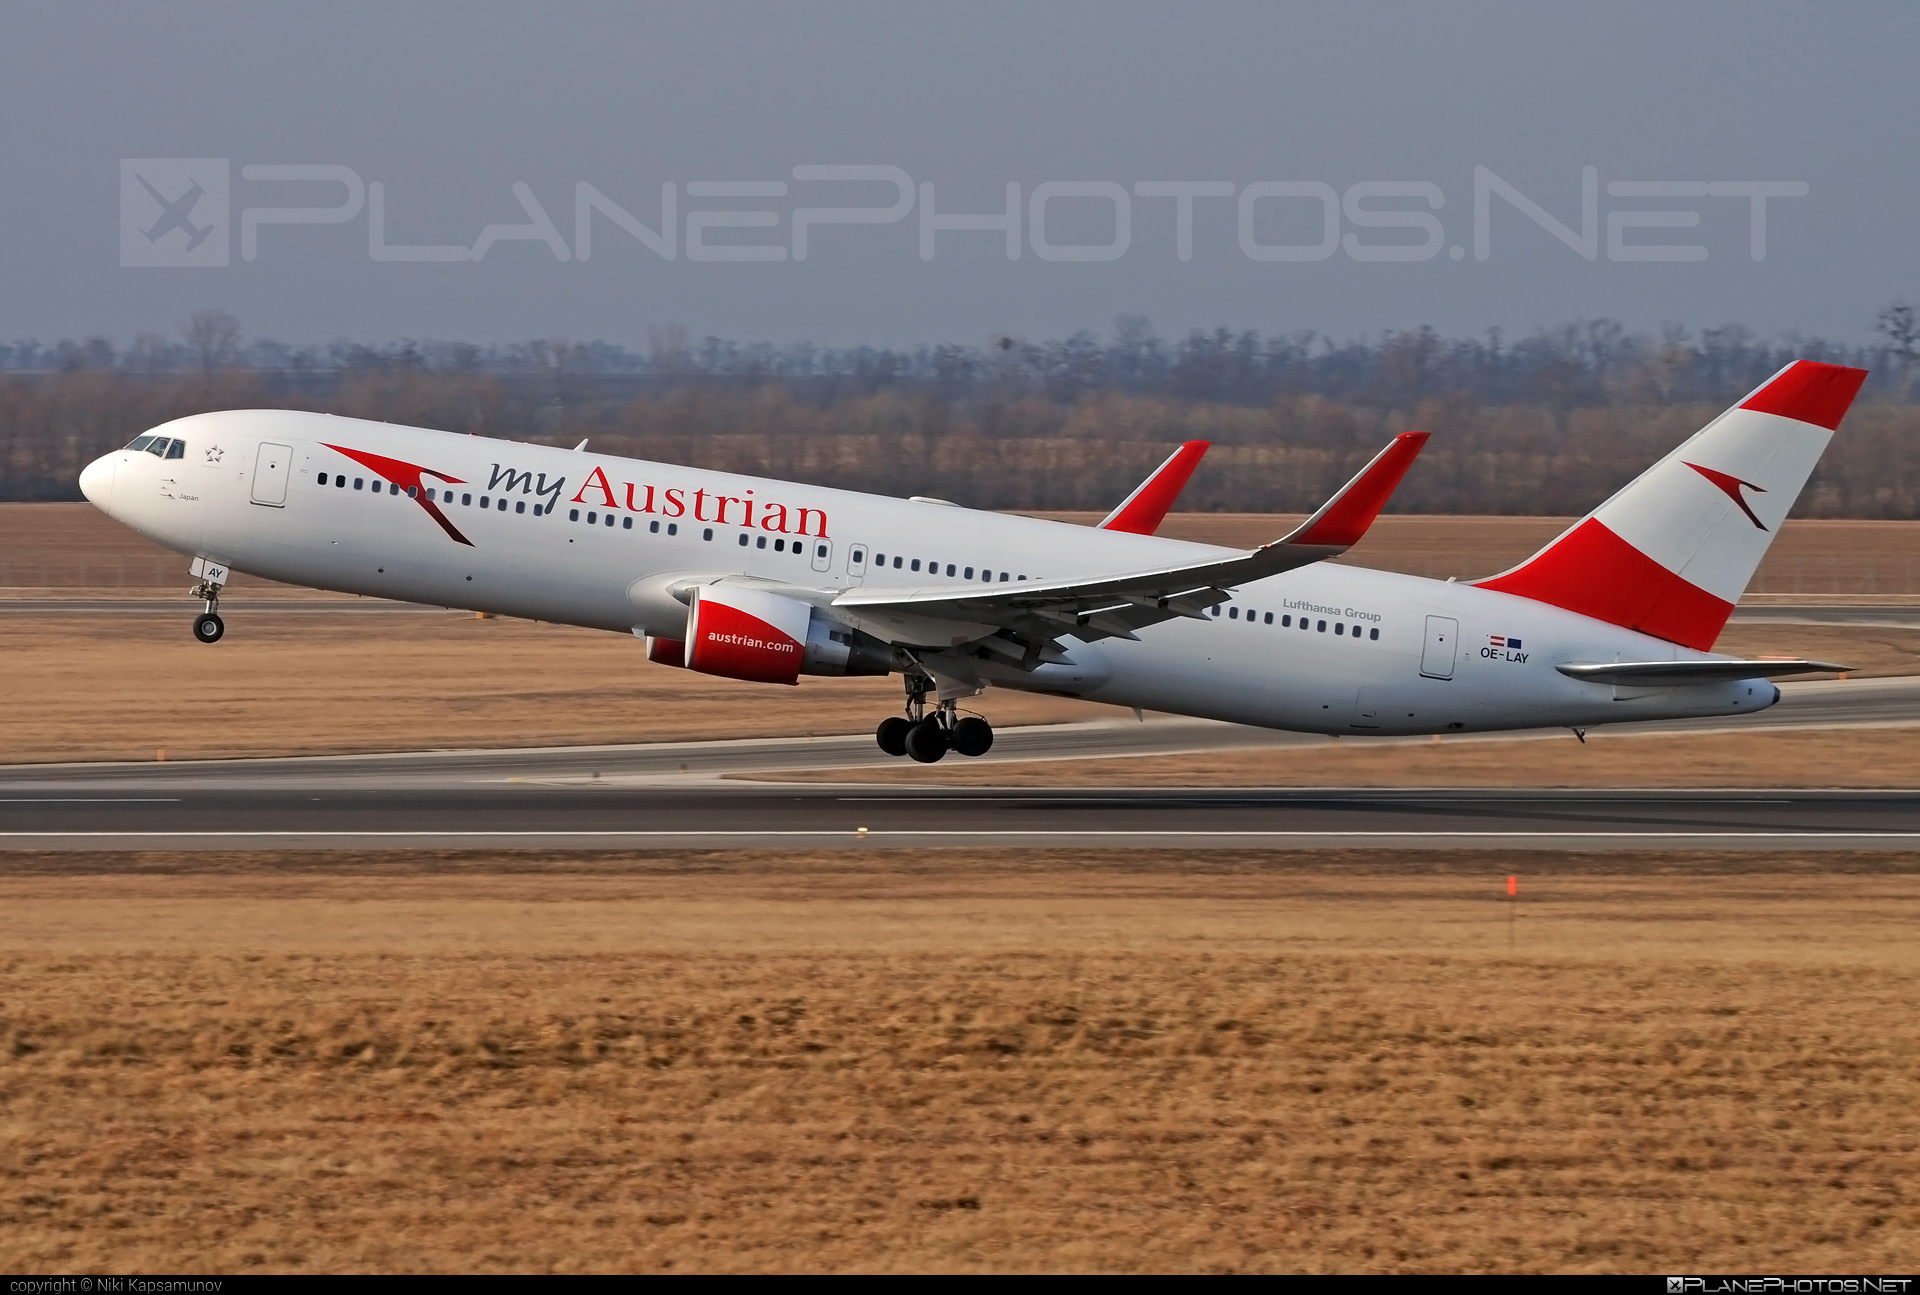 Boeing 767-300ER - OE-LAY operated by Austrian Airlines #austrian #austrianAirlines #b767 #b767er #boeing #boeing767